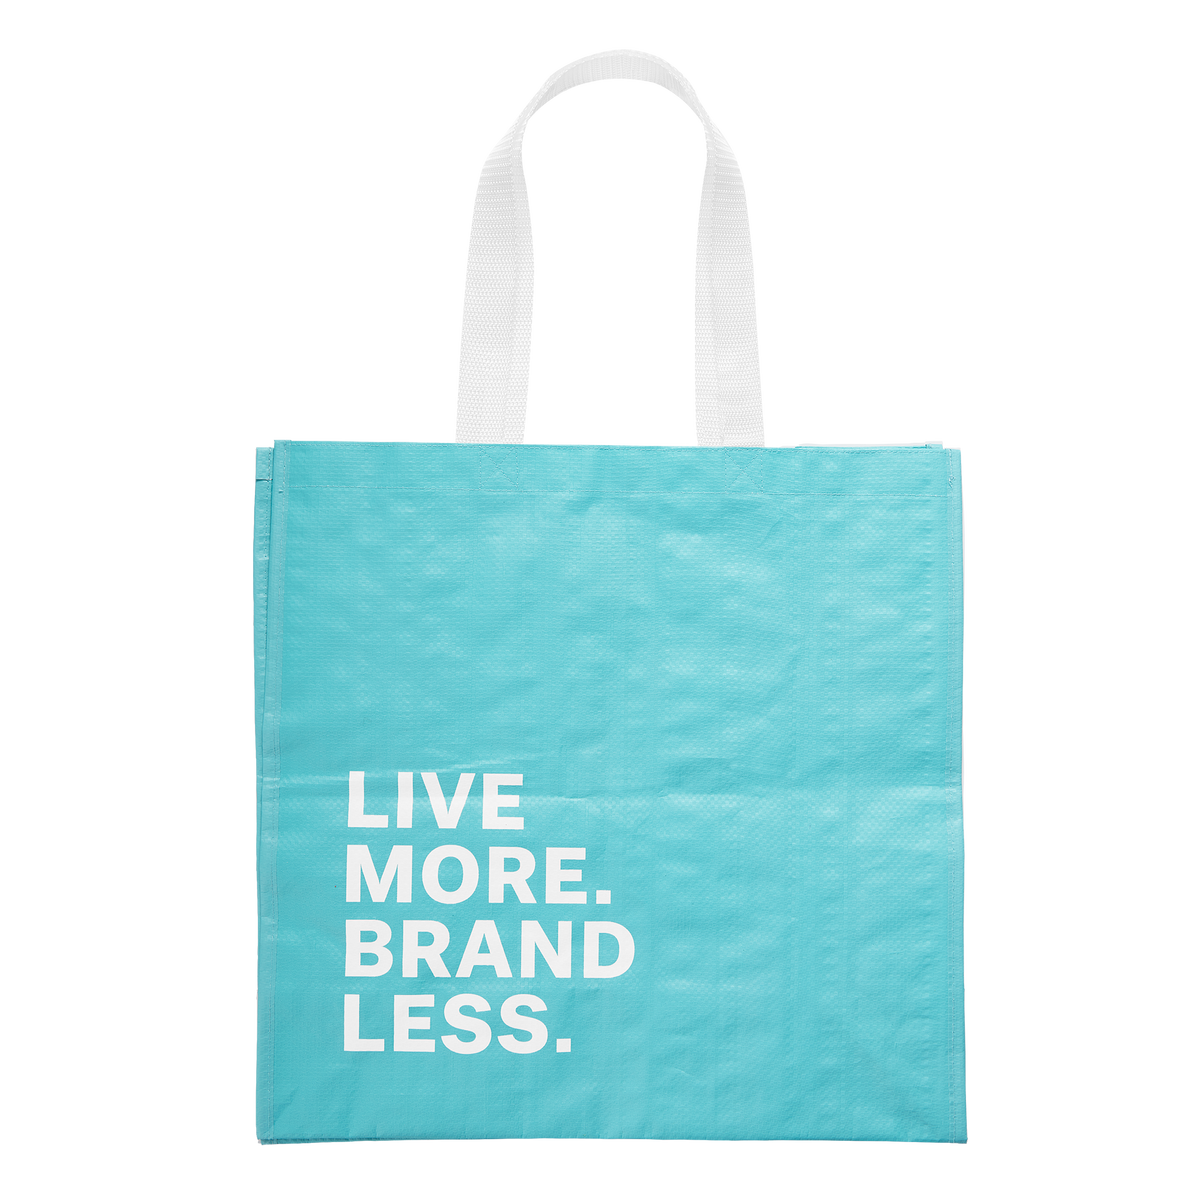 Front view, Teal bag with slogan: live more brand less.